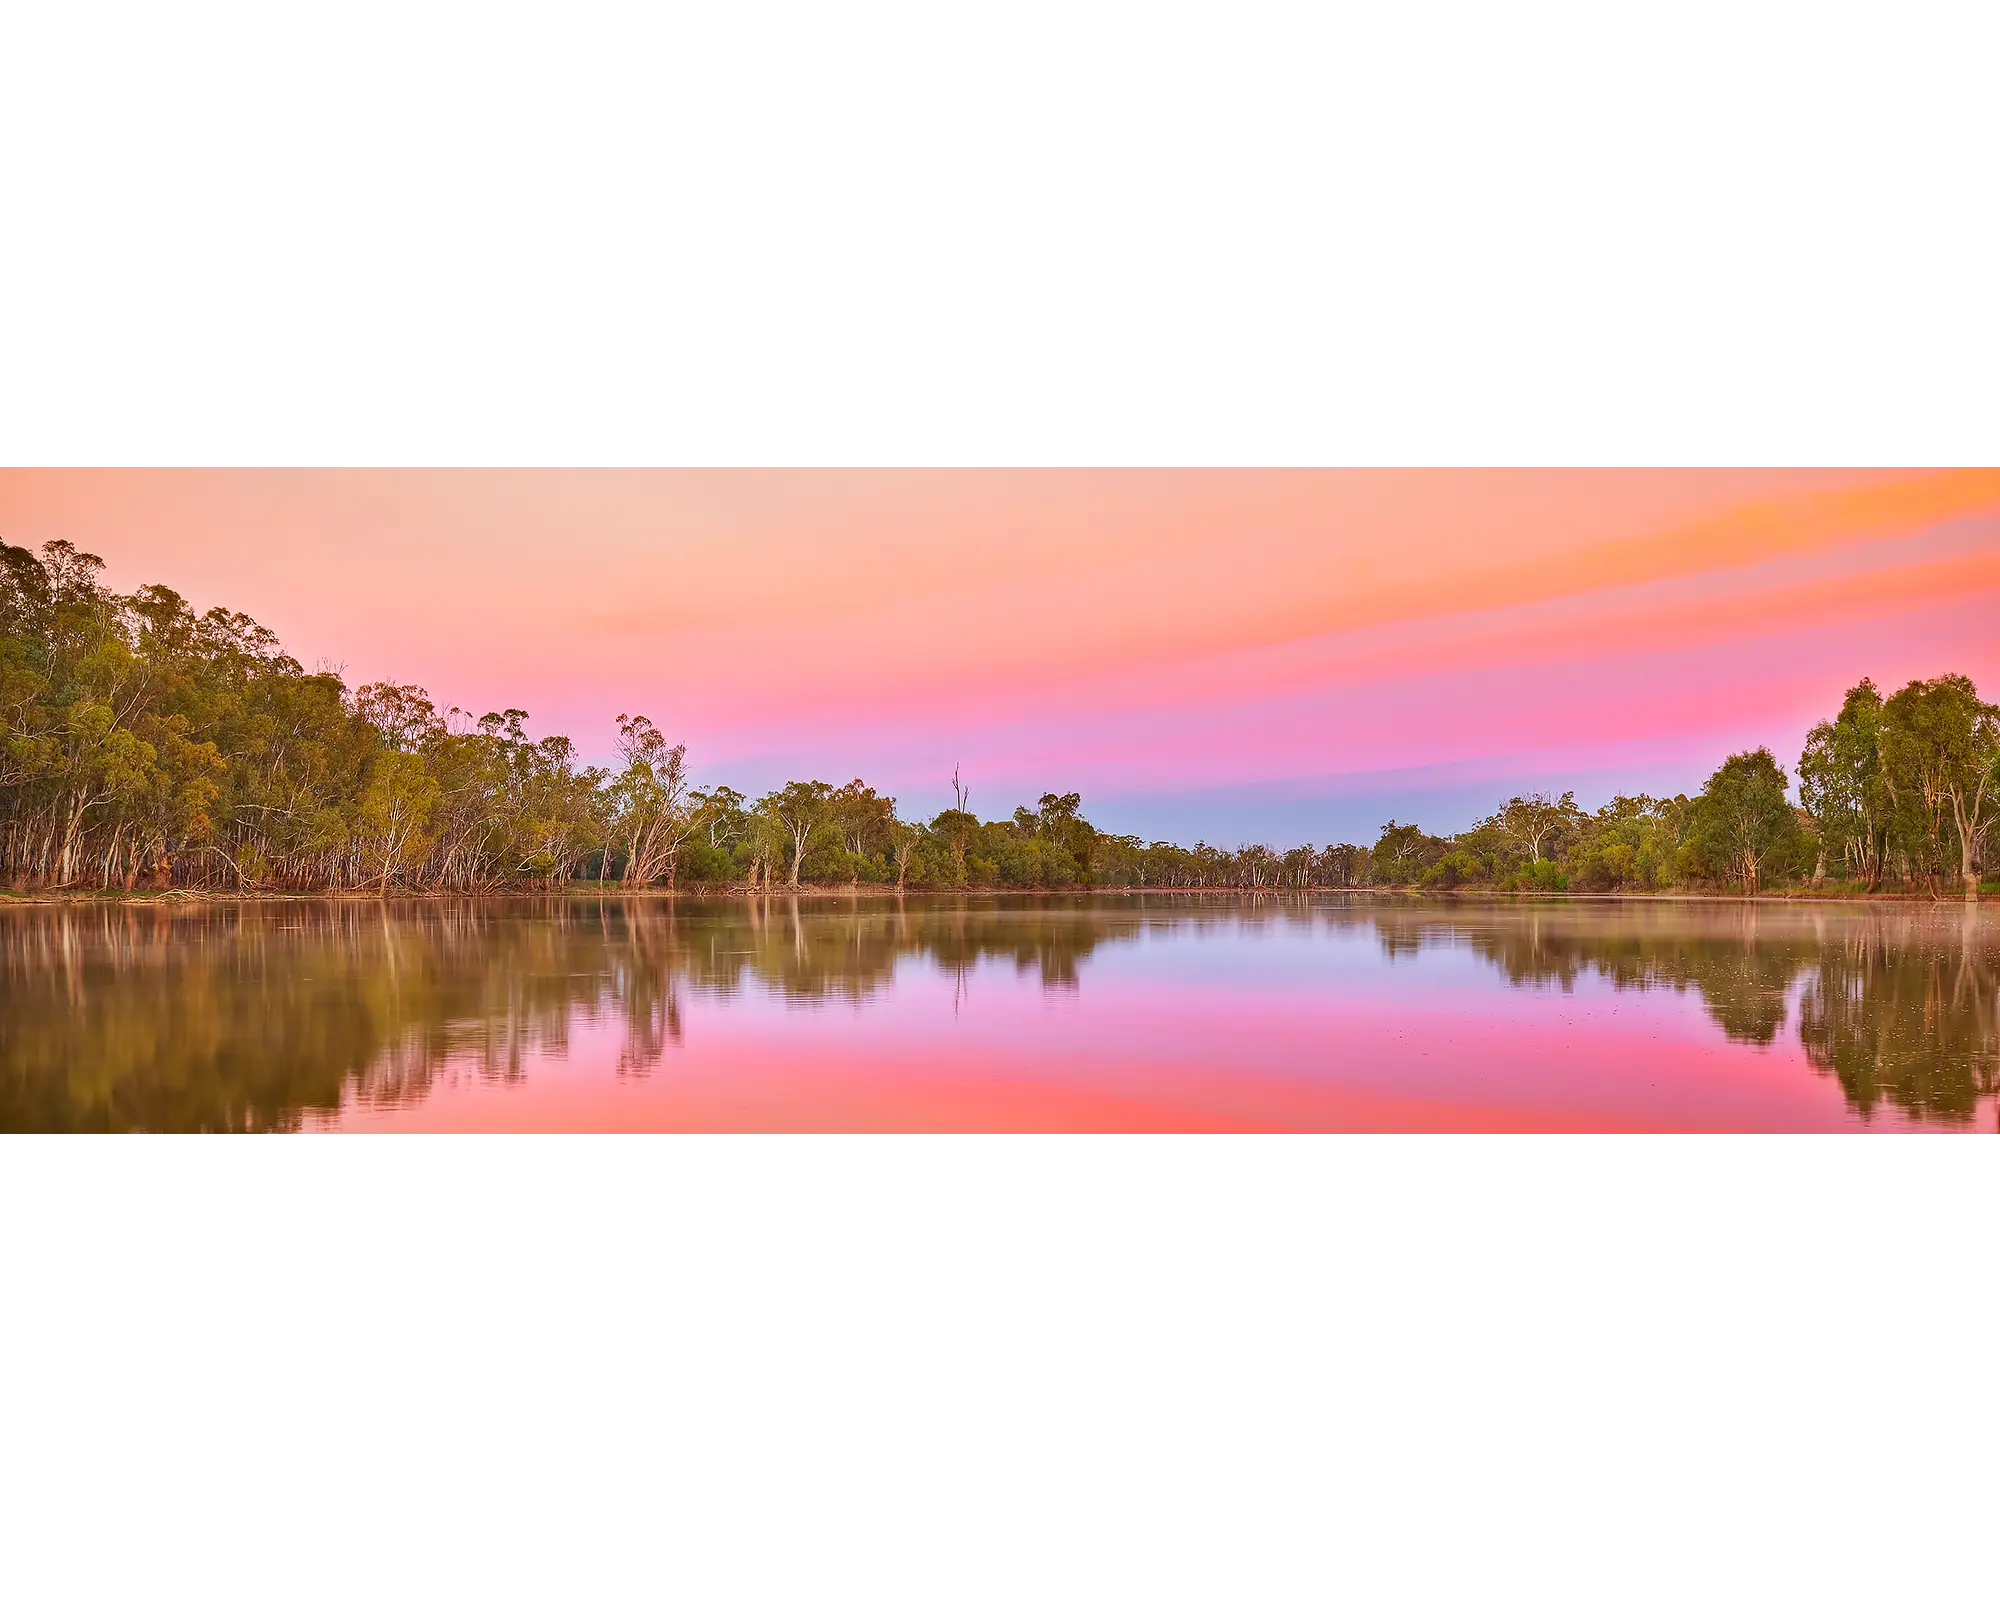 Oasis OF Serenity - pink sunrise over the Murray River, South Australia.